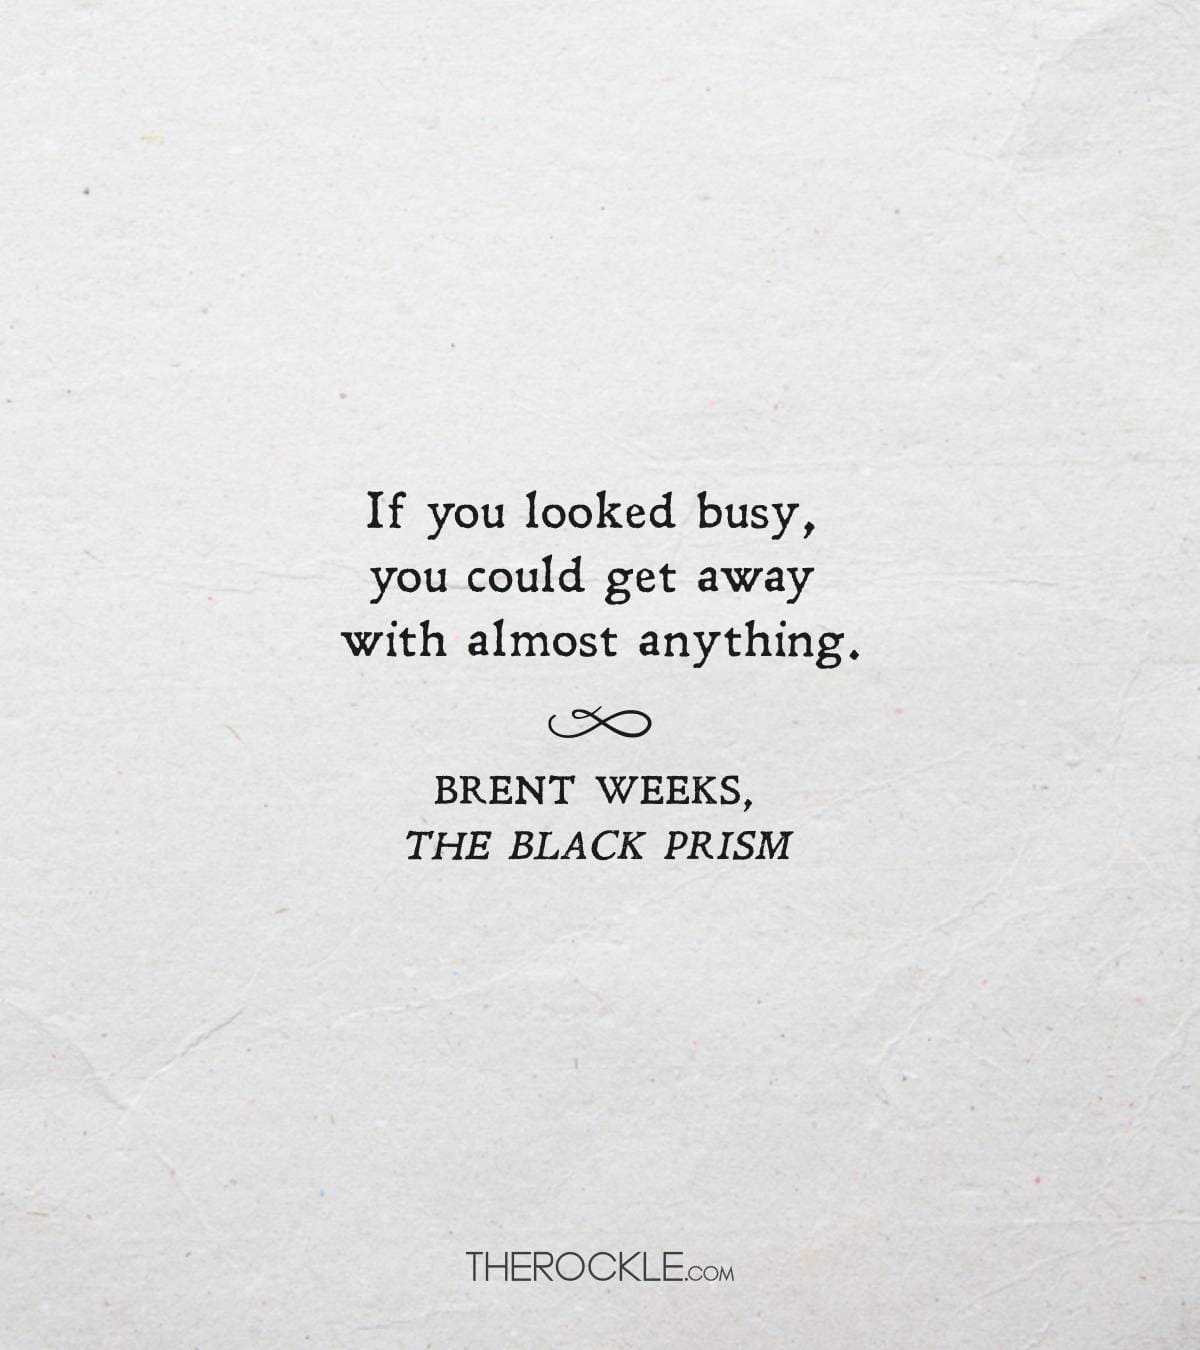 Quote from The Black Prism book